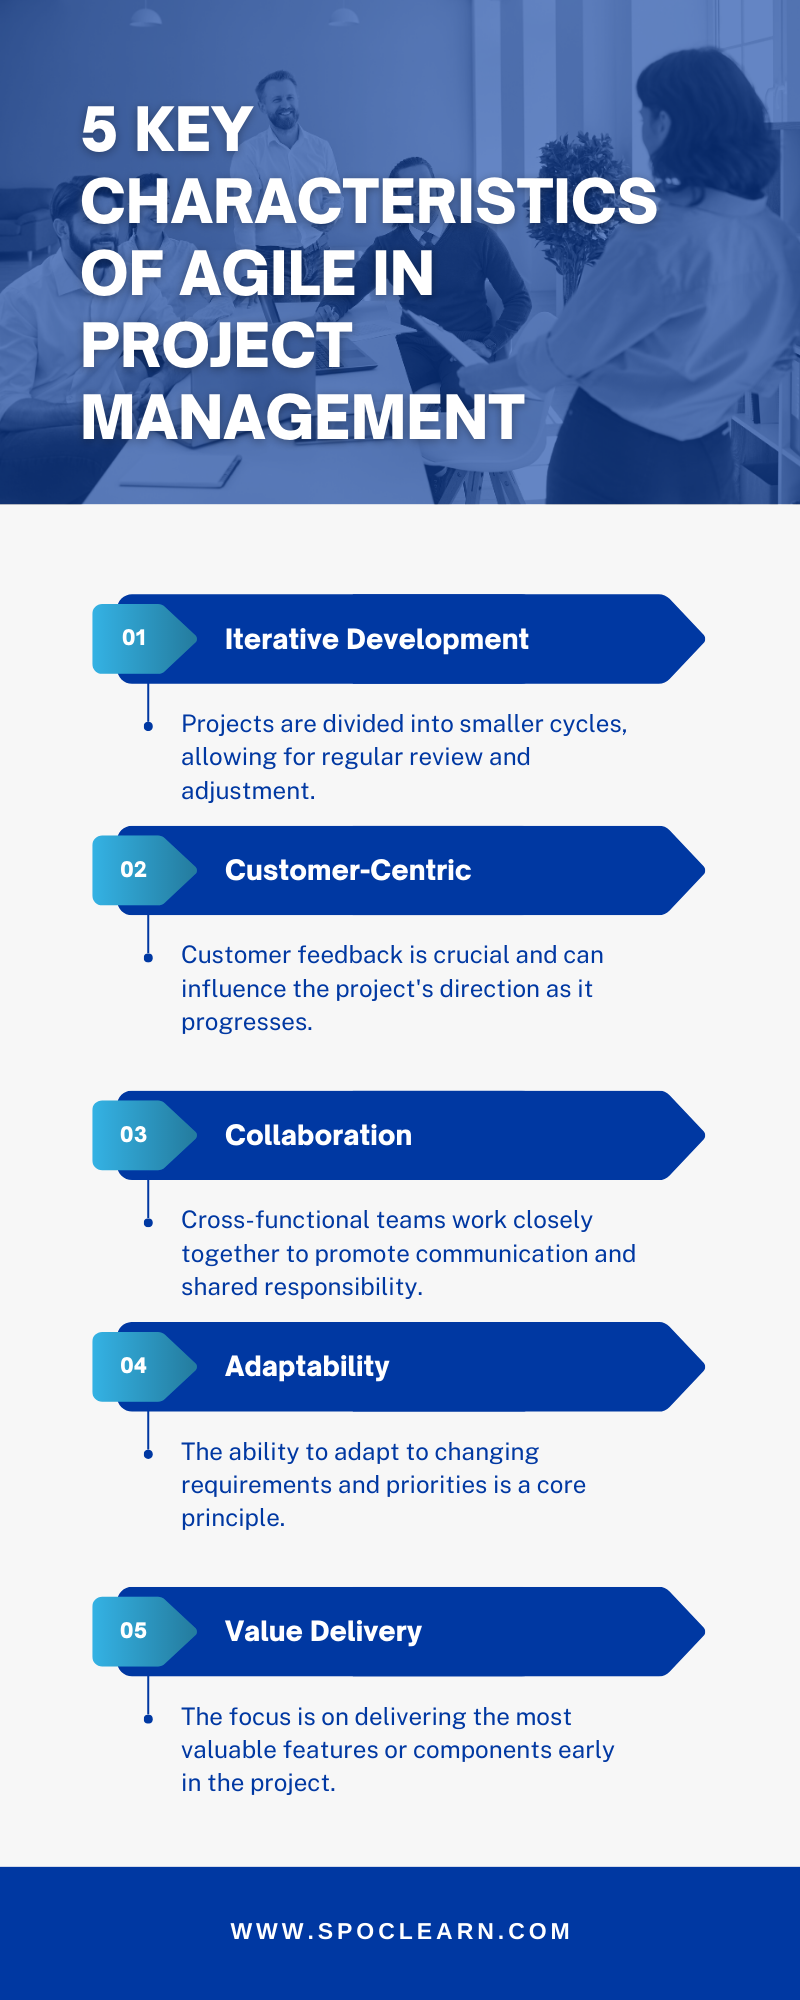 Key characteristics of Agile in project management